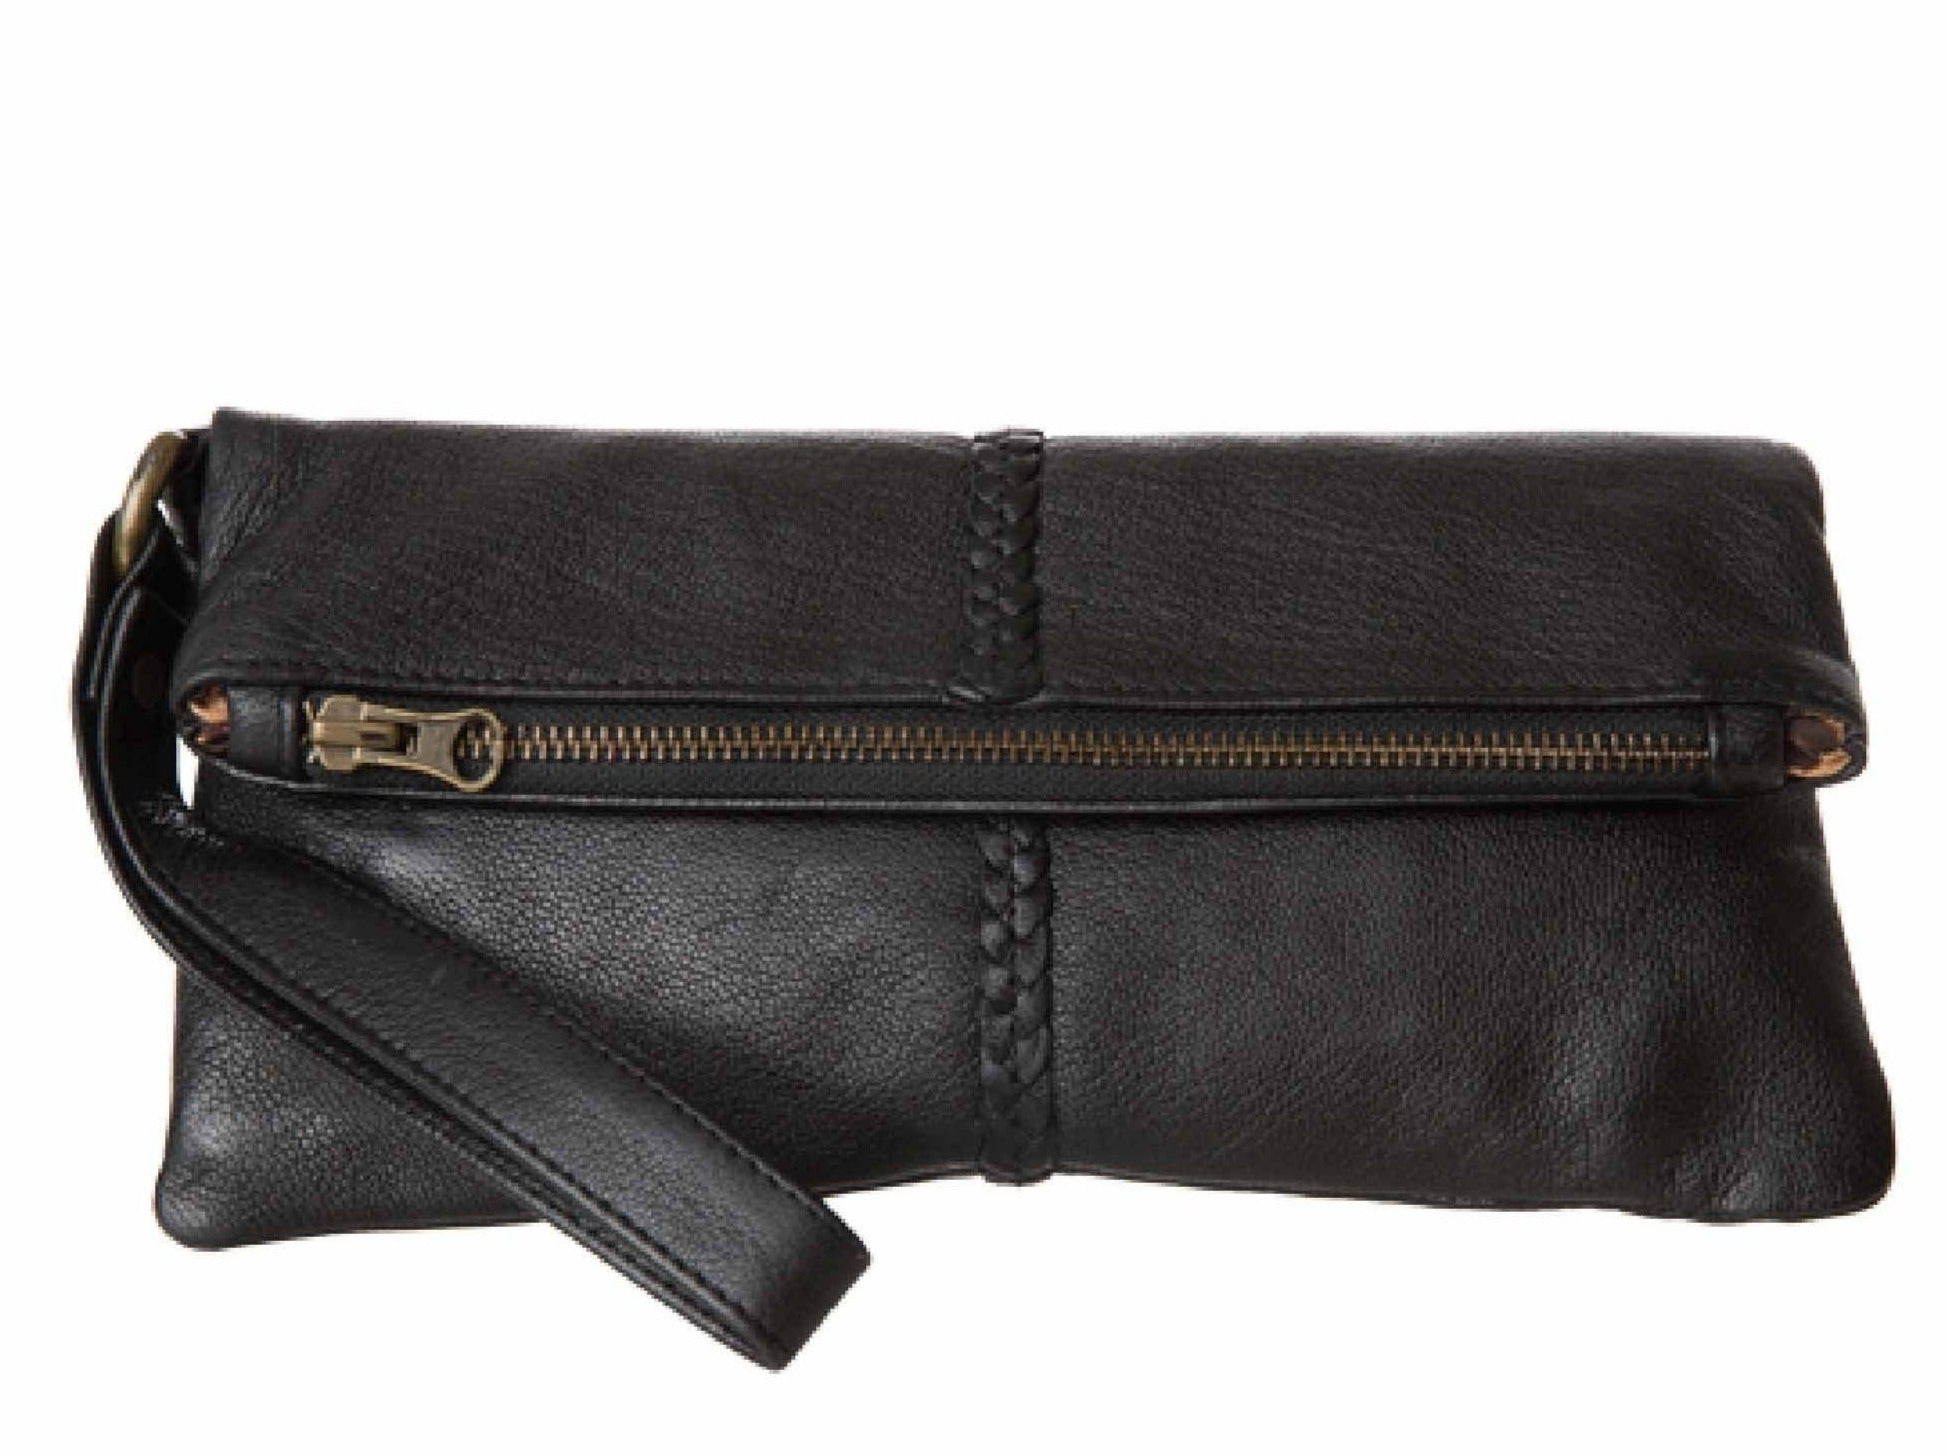 Leather Wallet Luna Clutch Black Picture 1 Regular from Cadelle Leather